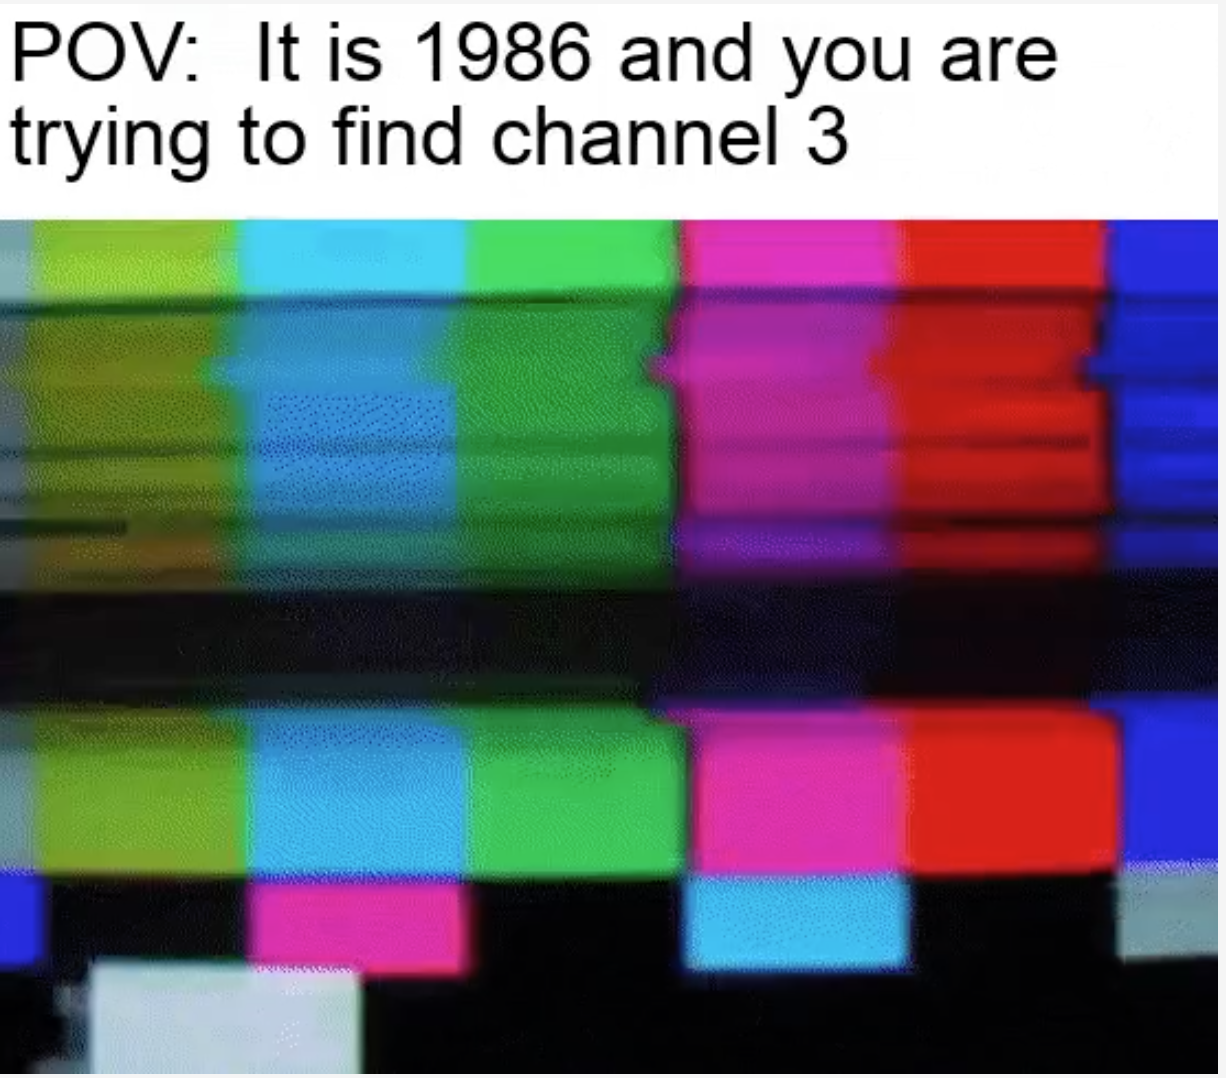 funny gaming memes - graphic design - Pov It is 1986 and you are trying to find channel 3